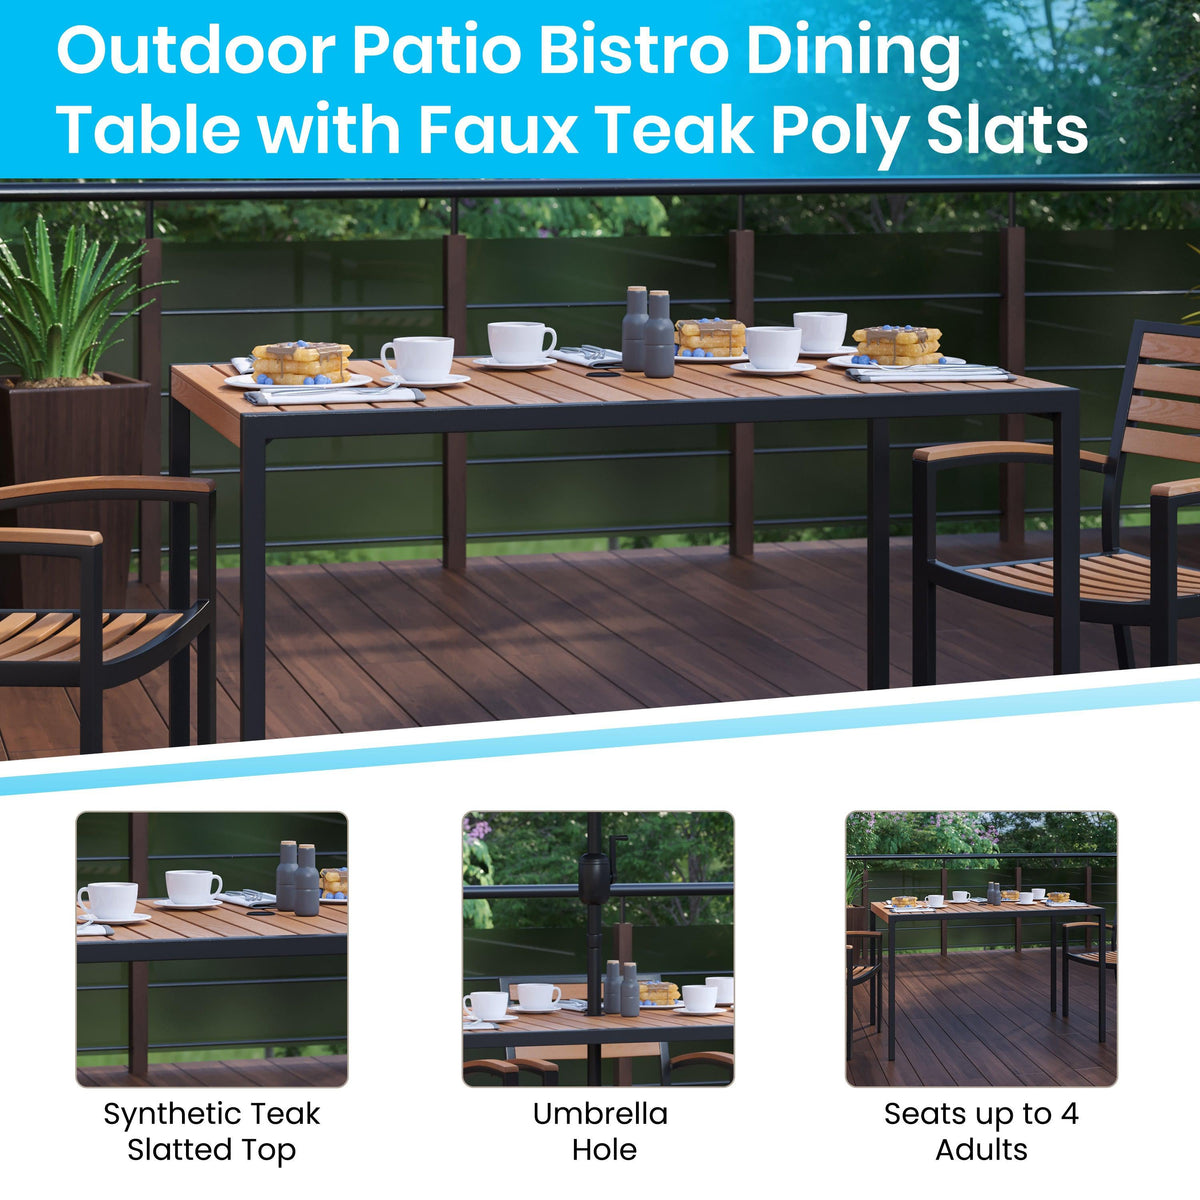 Teak |#| 30inch x 48inch All-Weather Faux Teak Patio Dining Table with Steel Frame - Seats 4